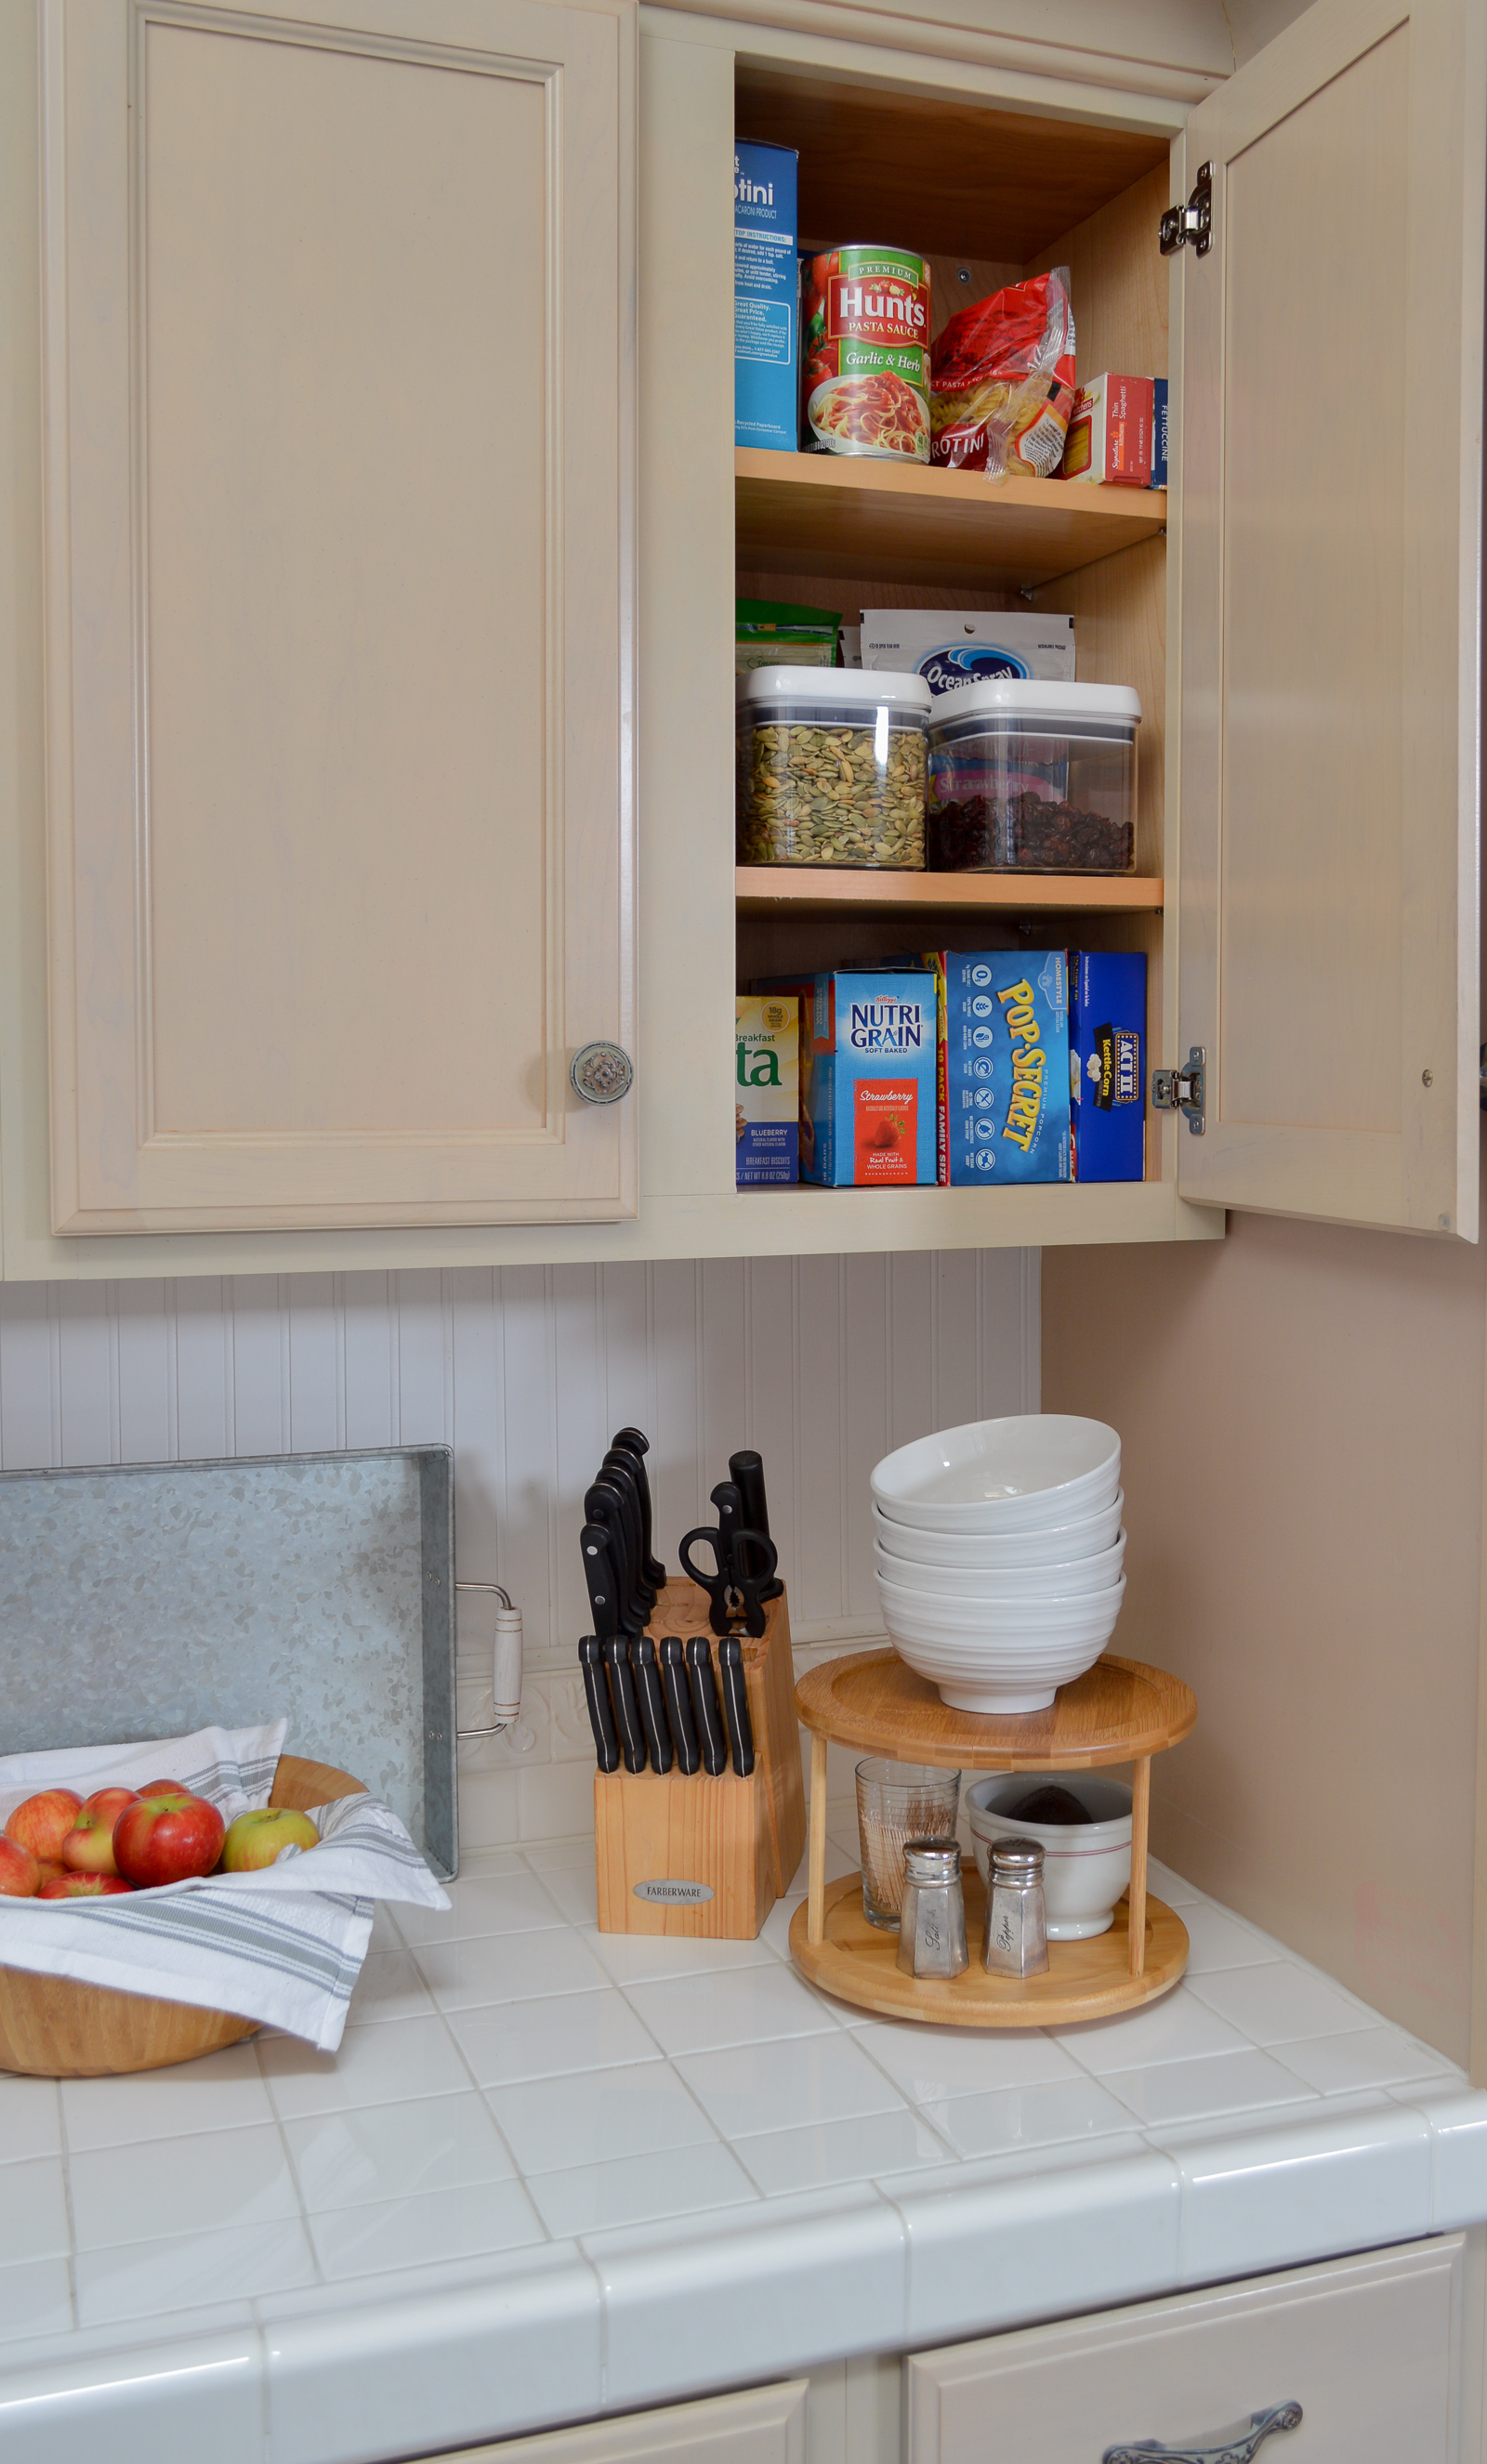 Tips and ideas to purge, clean and organize the kitchen - budget friendly real-life organization details at www.foxhollowcottage.com #sponsored with Better Homes & Gardens at Walmart